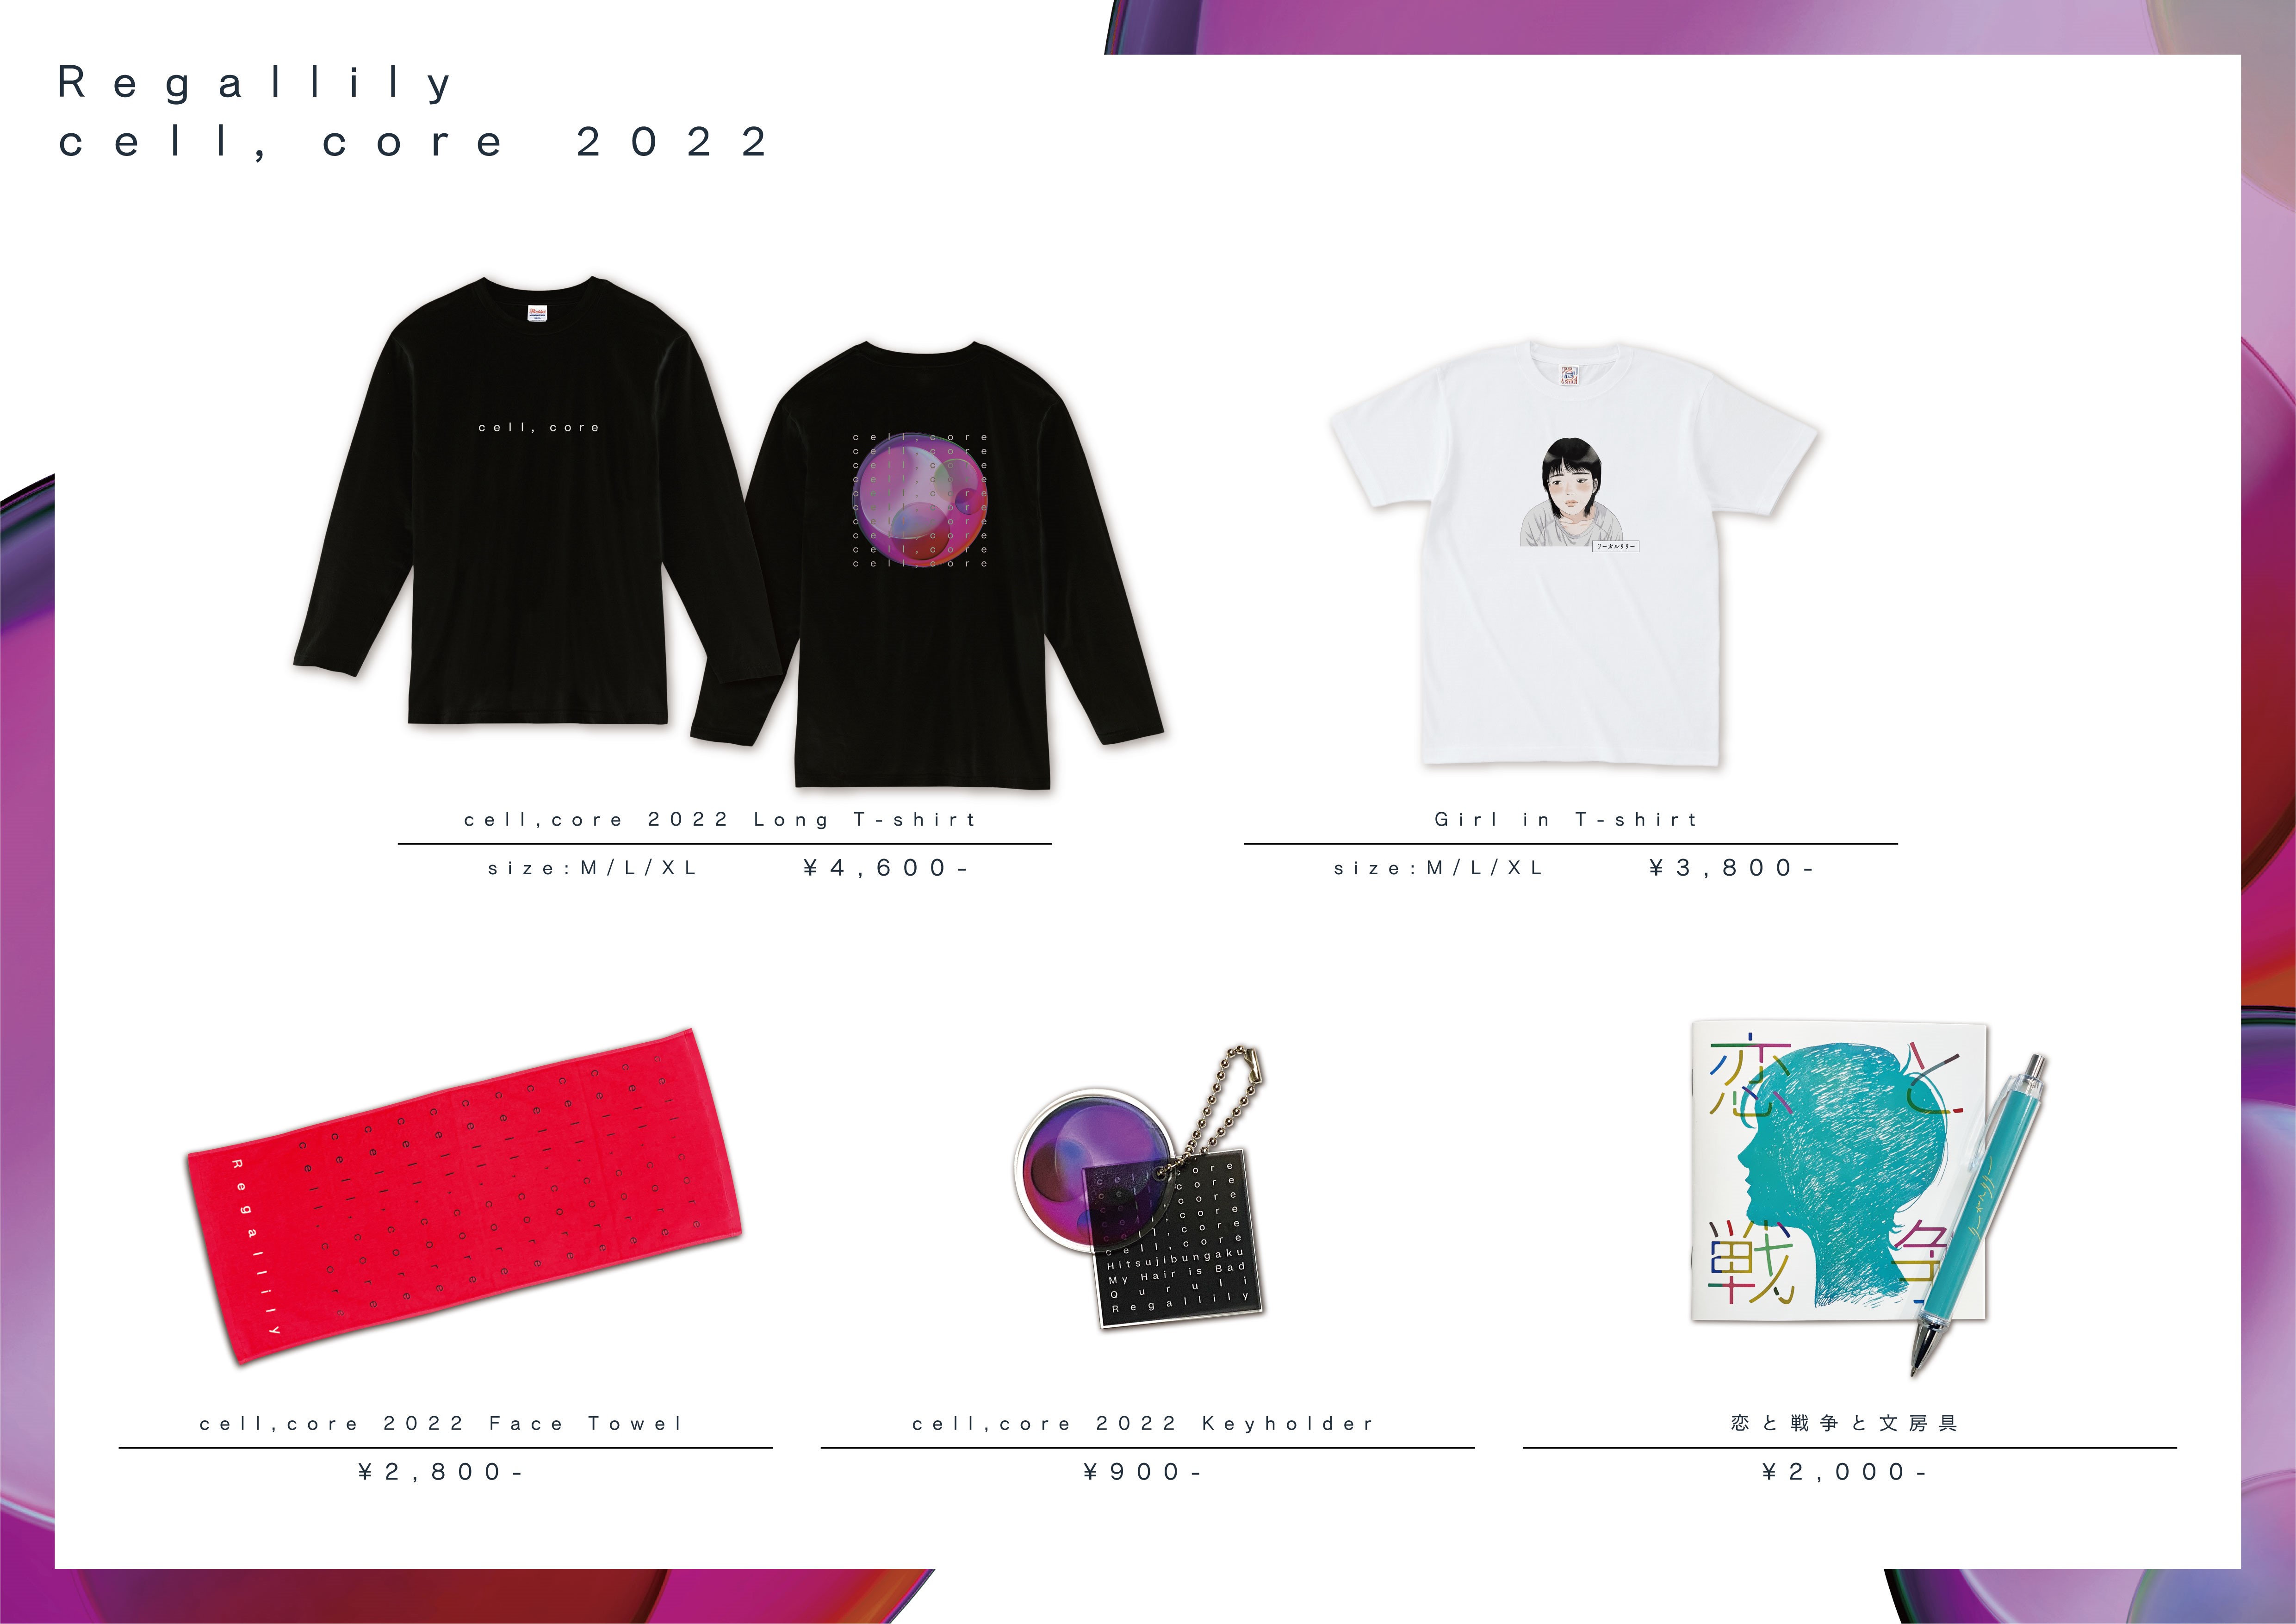 2 man project "cell, core 2022" goods